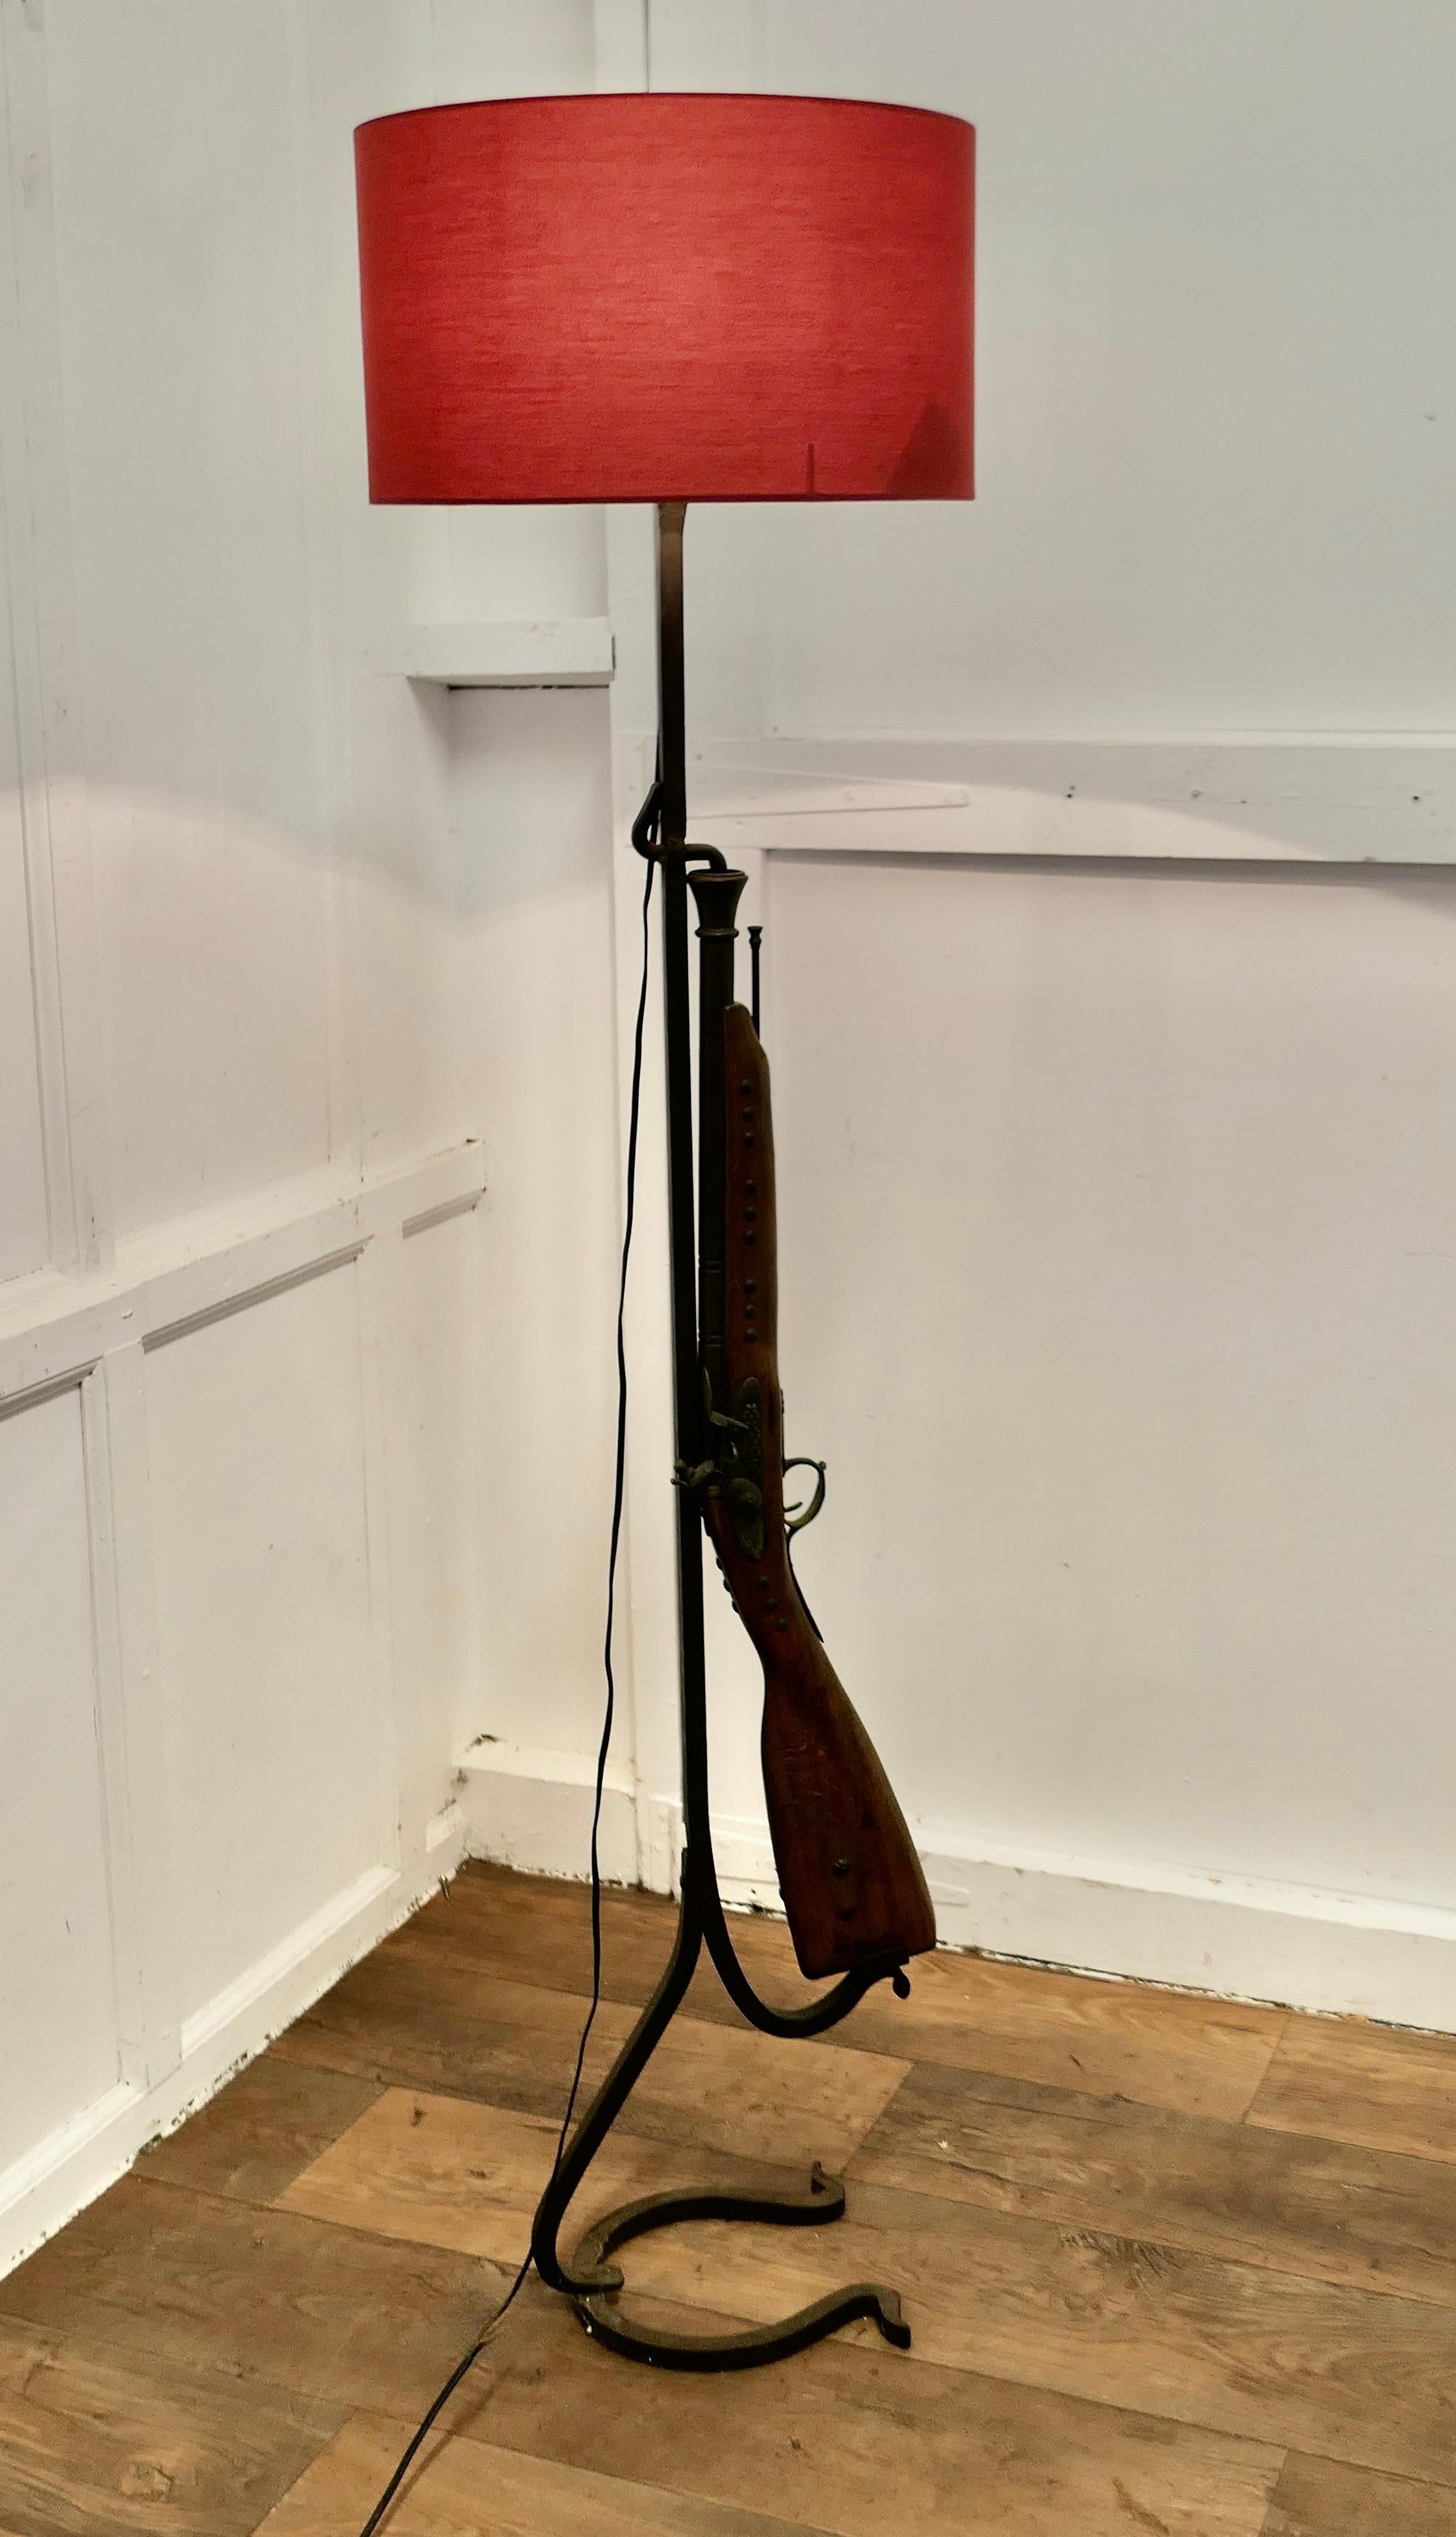 Quirky Hunting & Shooting Floor Lamp

A great piece made by a blacksmith on a wrought iron stand, it has a Horseshoe shaped base and the upright has a realistic looking imitation Flint Lock Rifle complete with ram rod, needless to say this is not a